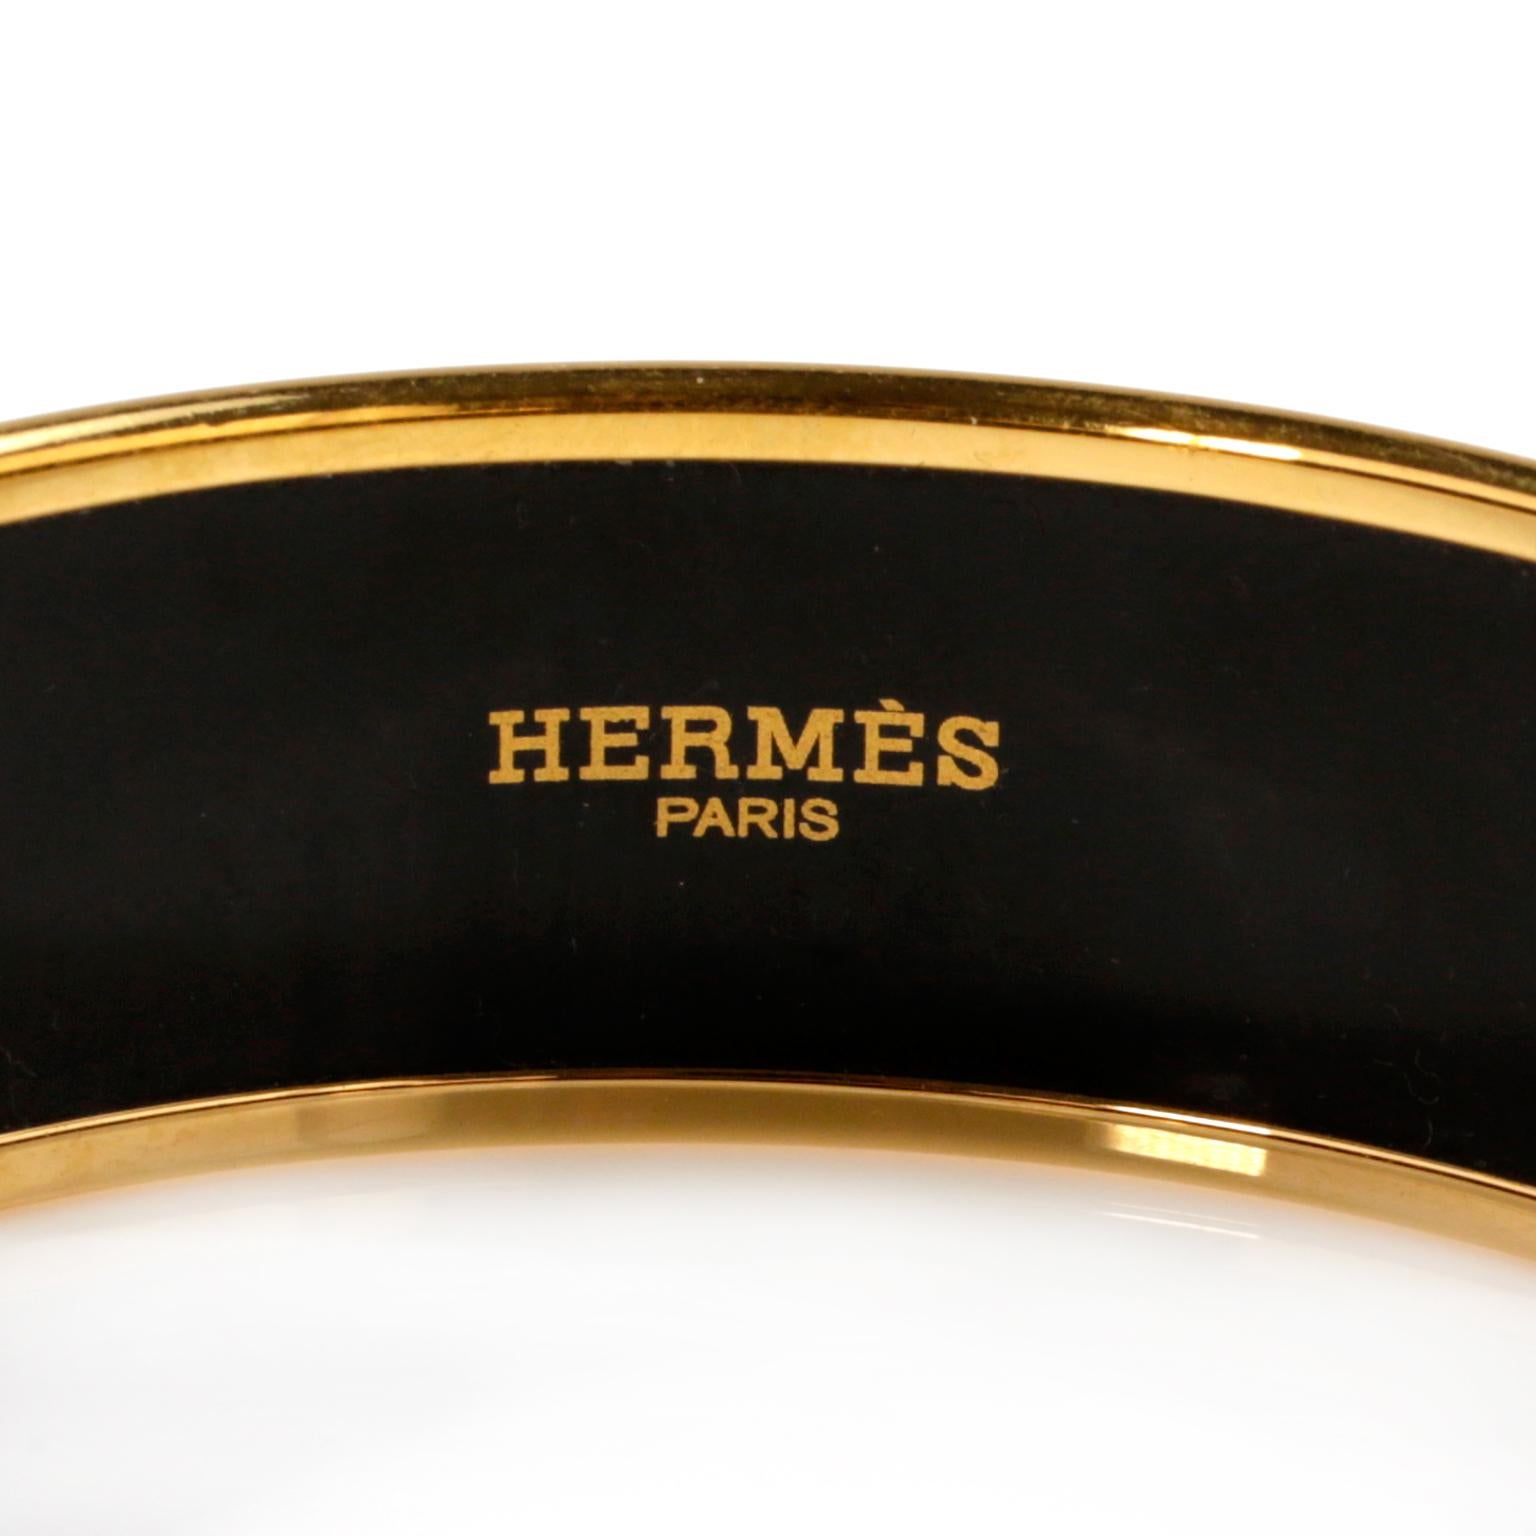 Hermès Lavender Enamel Tohu Bohu Bracelet- very good condition.  
Gold plated edges and whimsical letter and number design.  2010 production, made in France. 
A517
